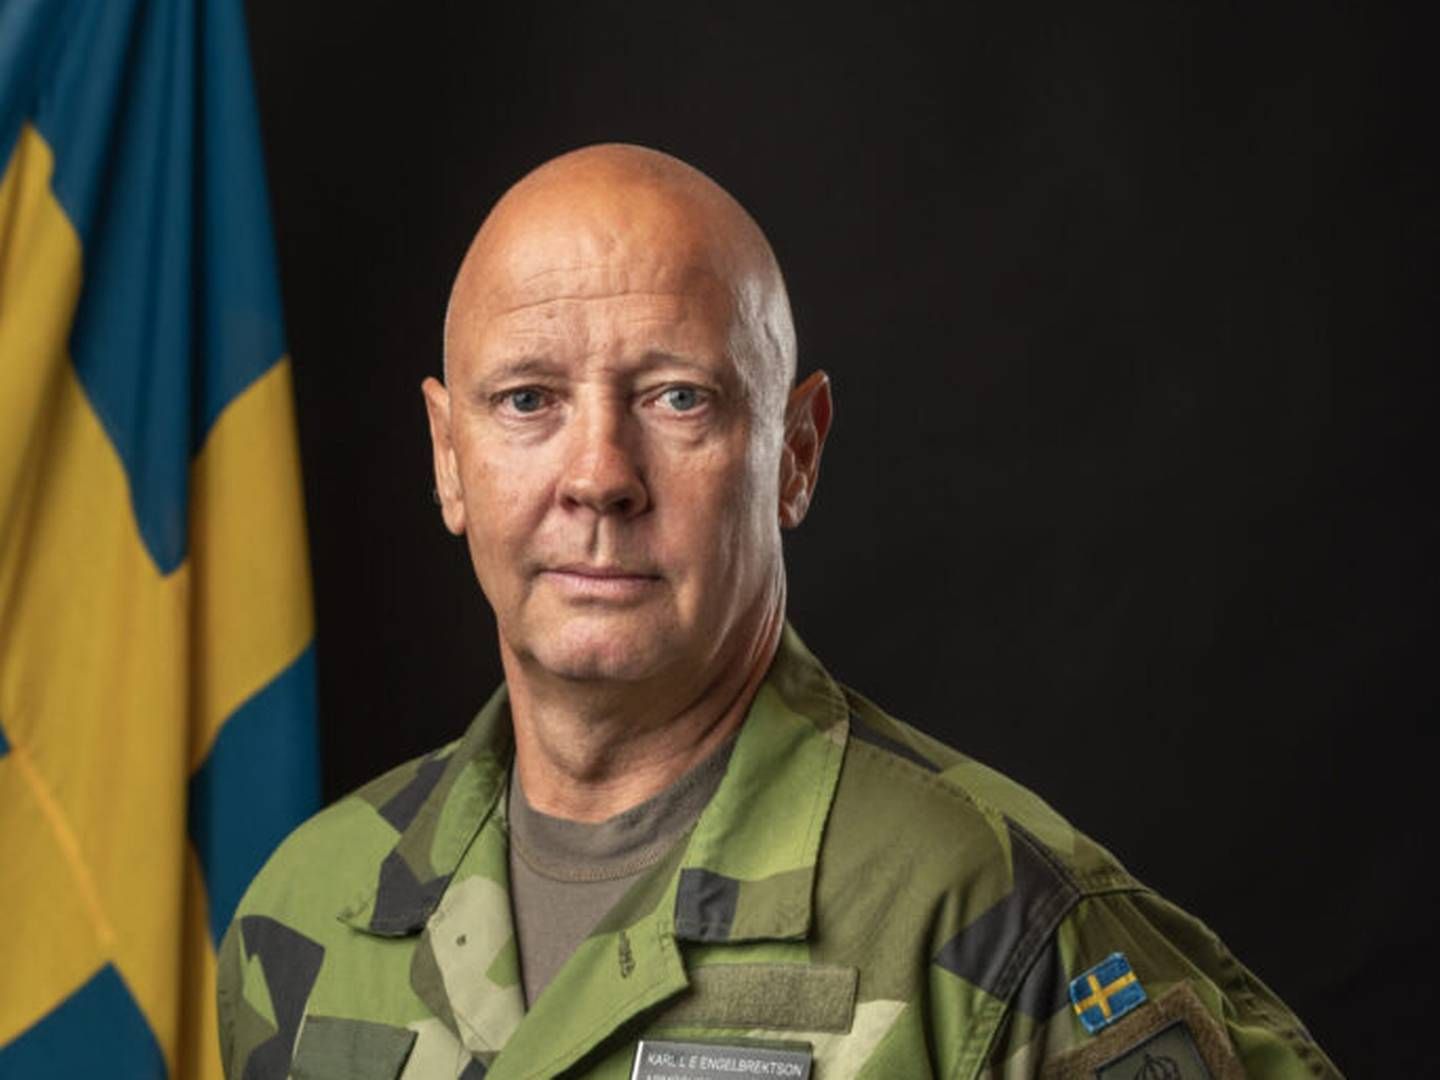 Major General Karl Engelbrektson, the former Swedish army chief, is head of the fund's advisory board. | Photo: Finserve Nordic / PR